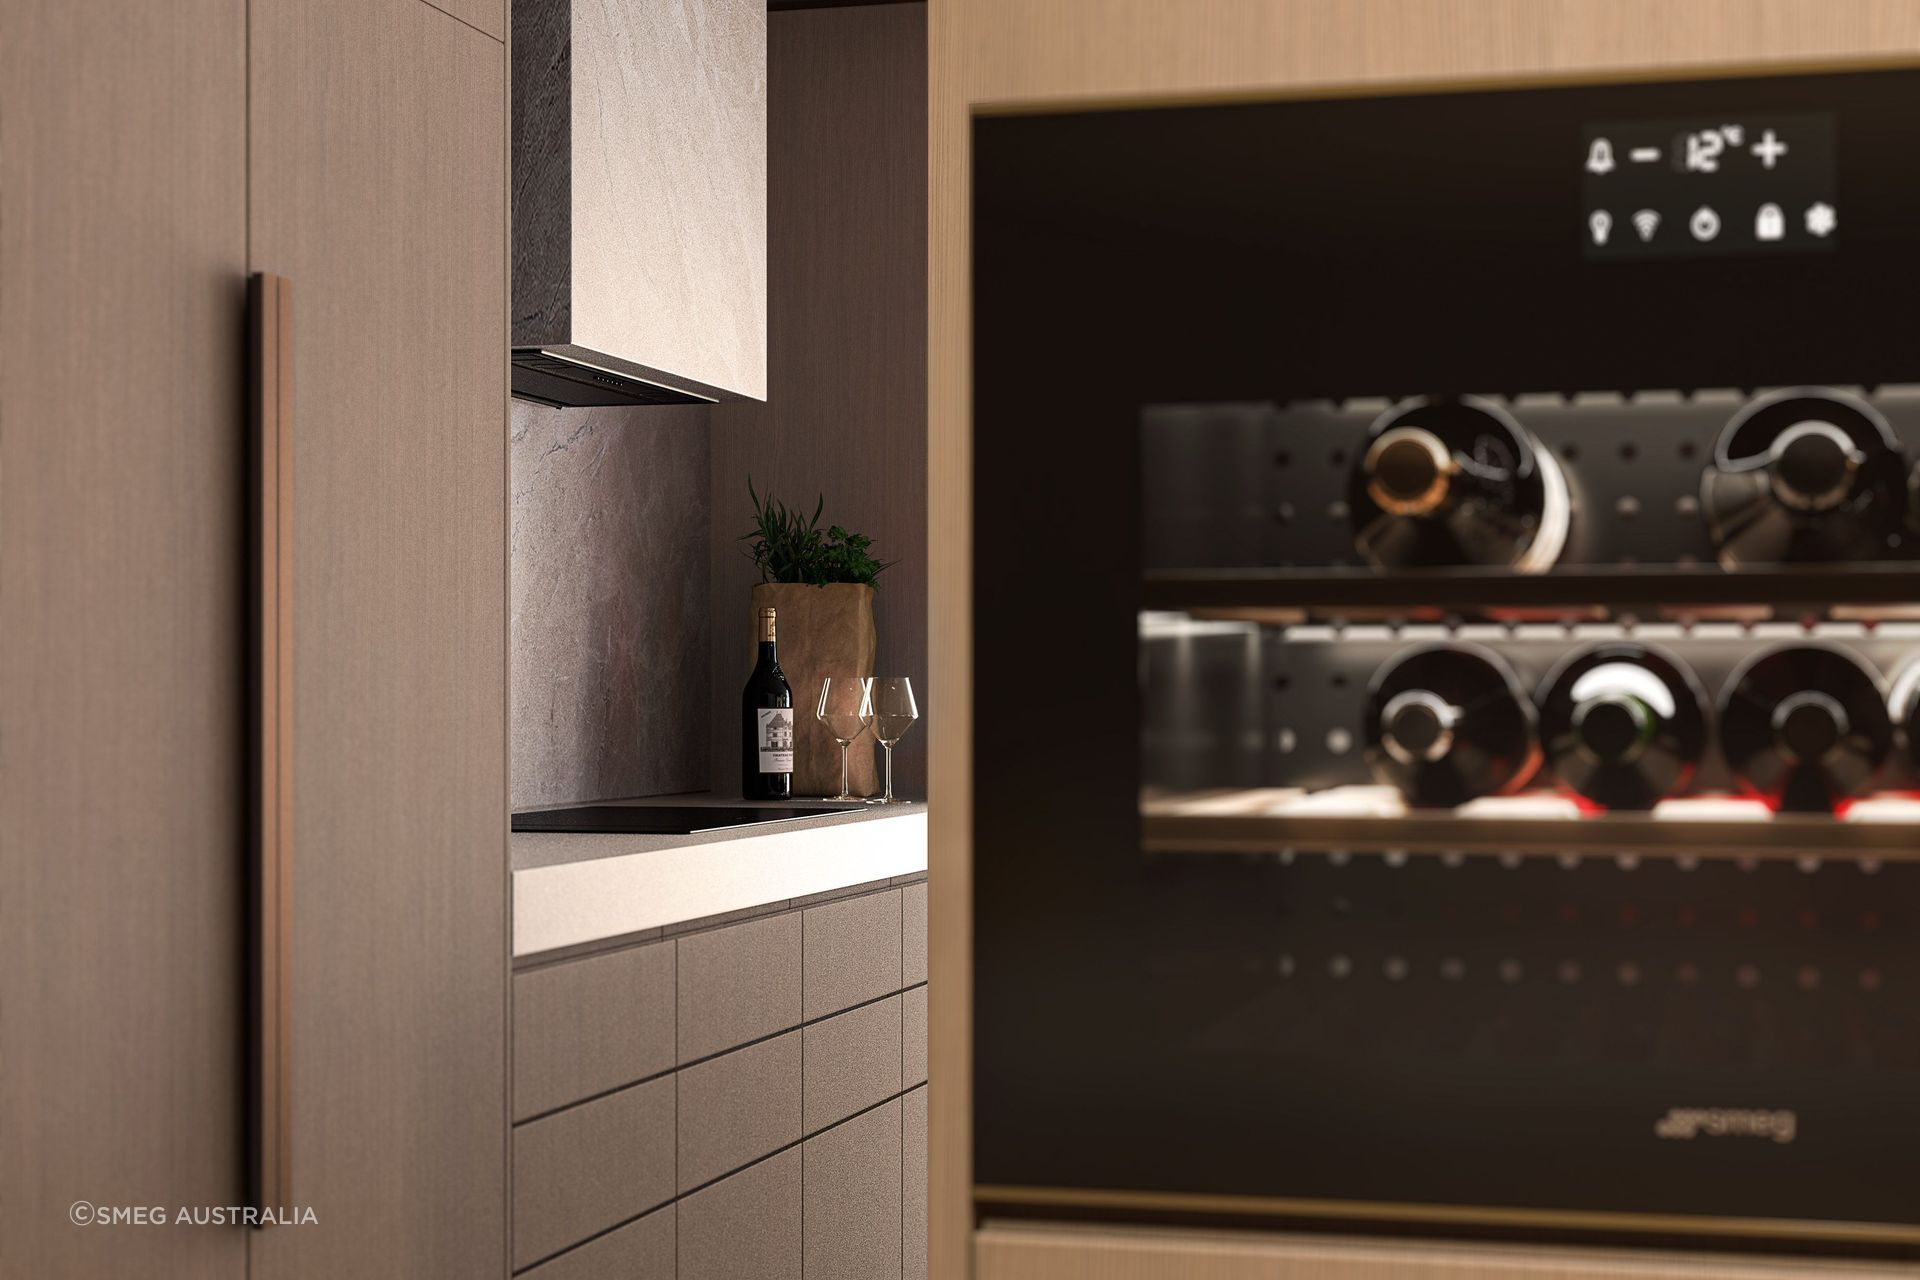 The built-in wine cooler stores wine at the right temperature